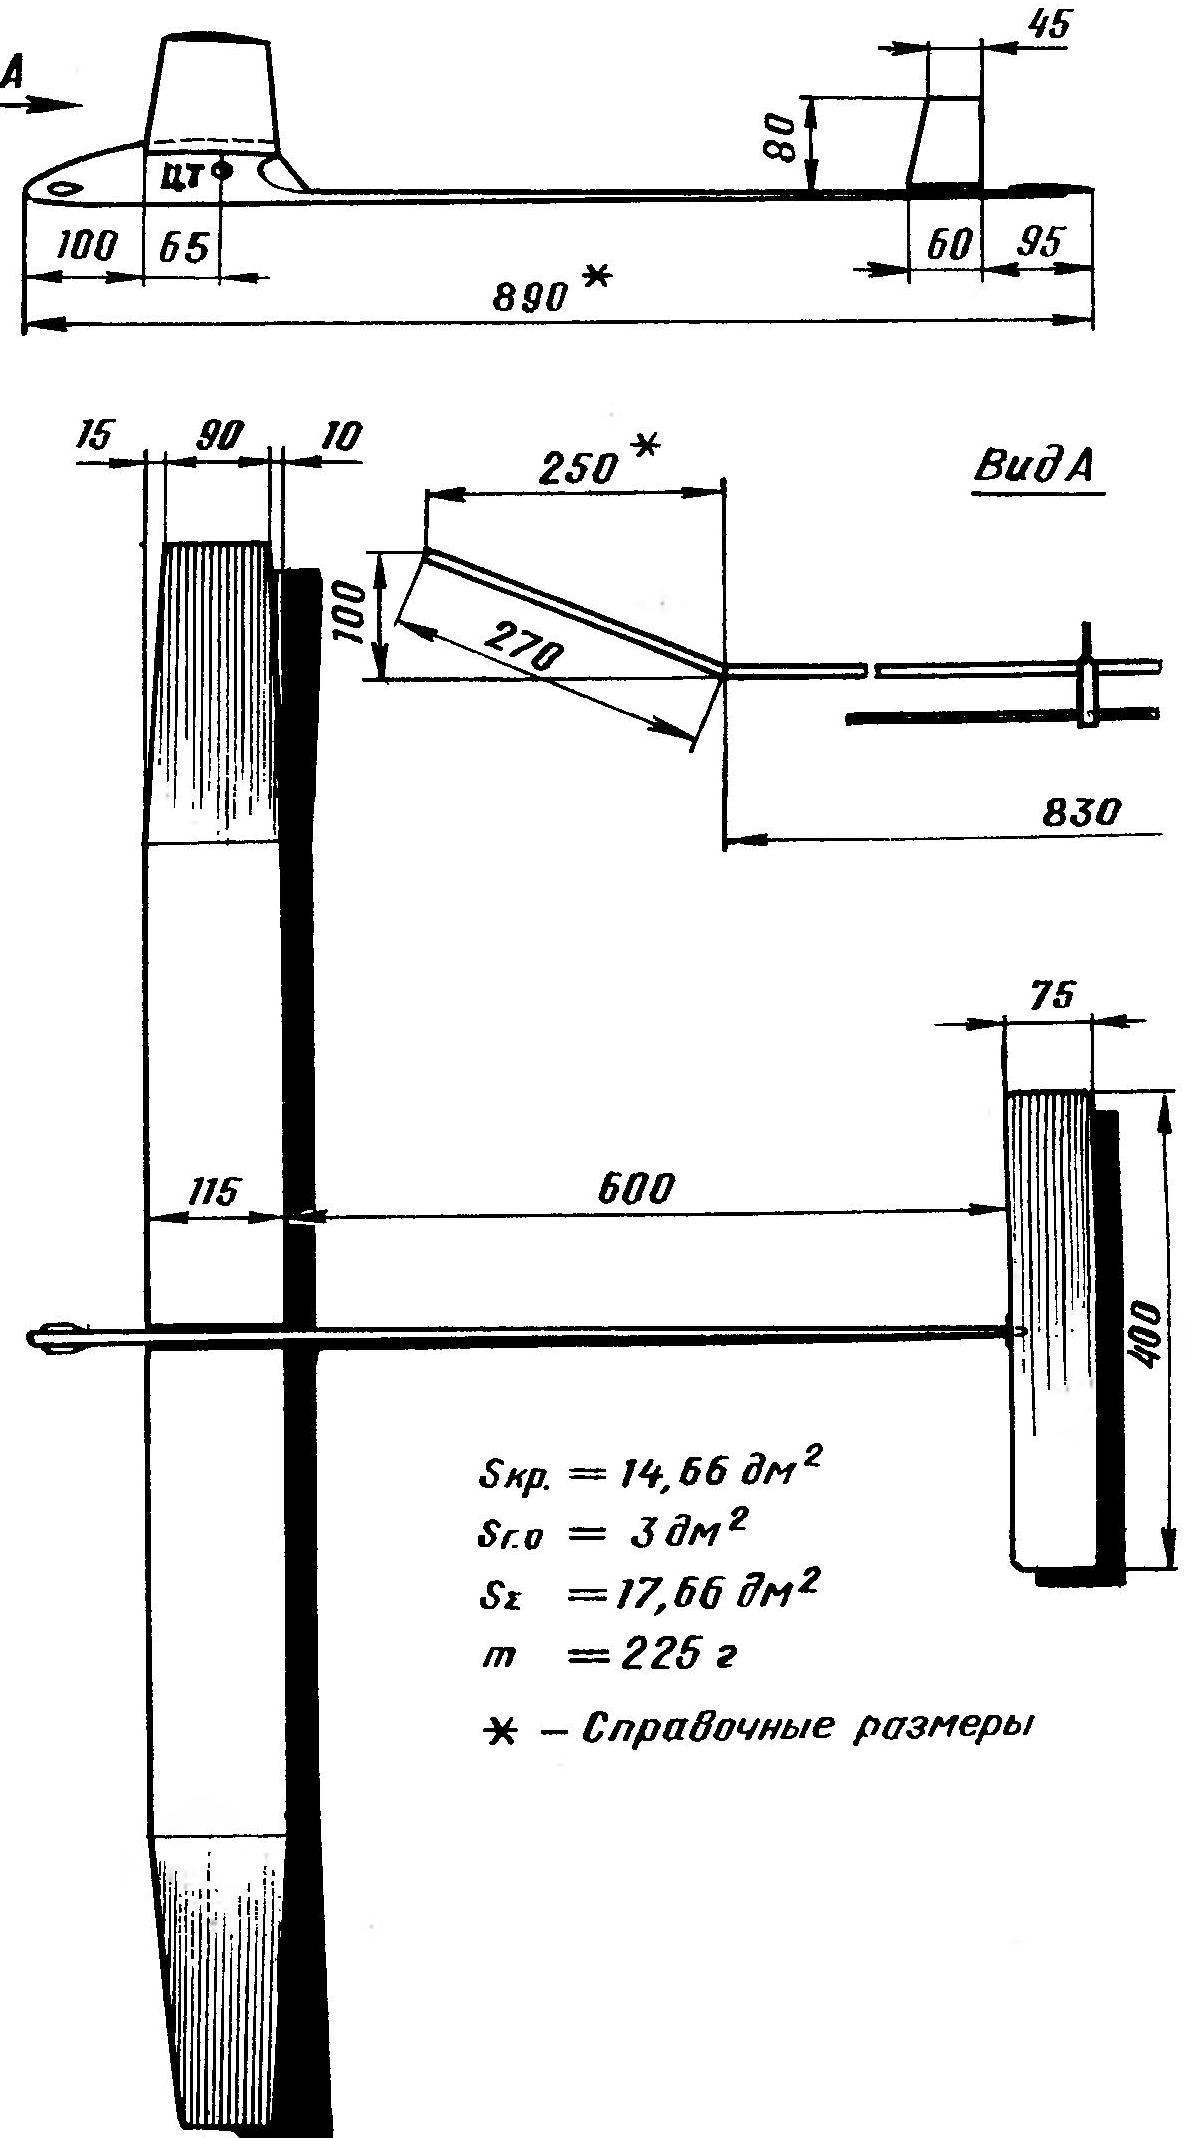 The geometrical parameters of the glider